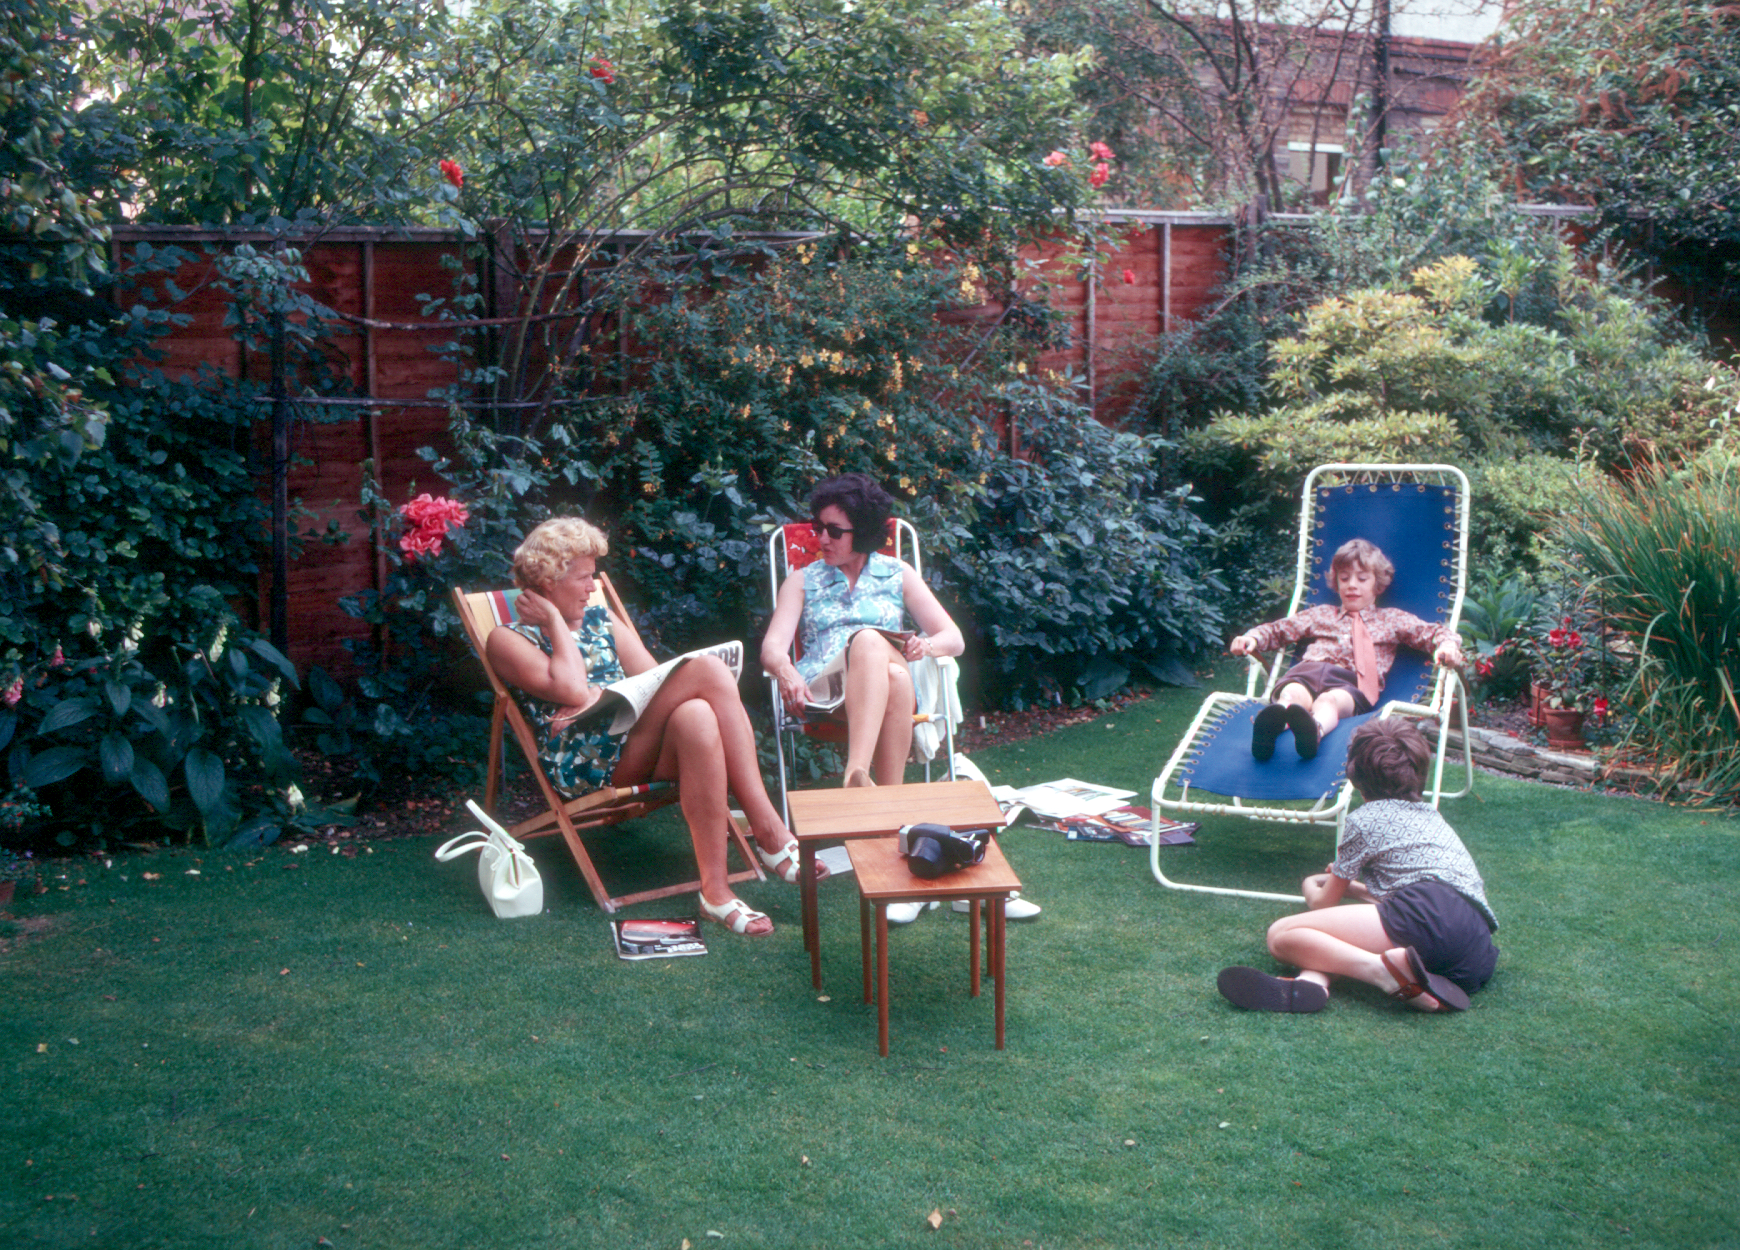 7203233k August 1972 - E, F and the boys in the garden at Hampton.